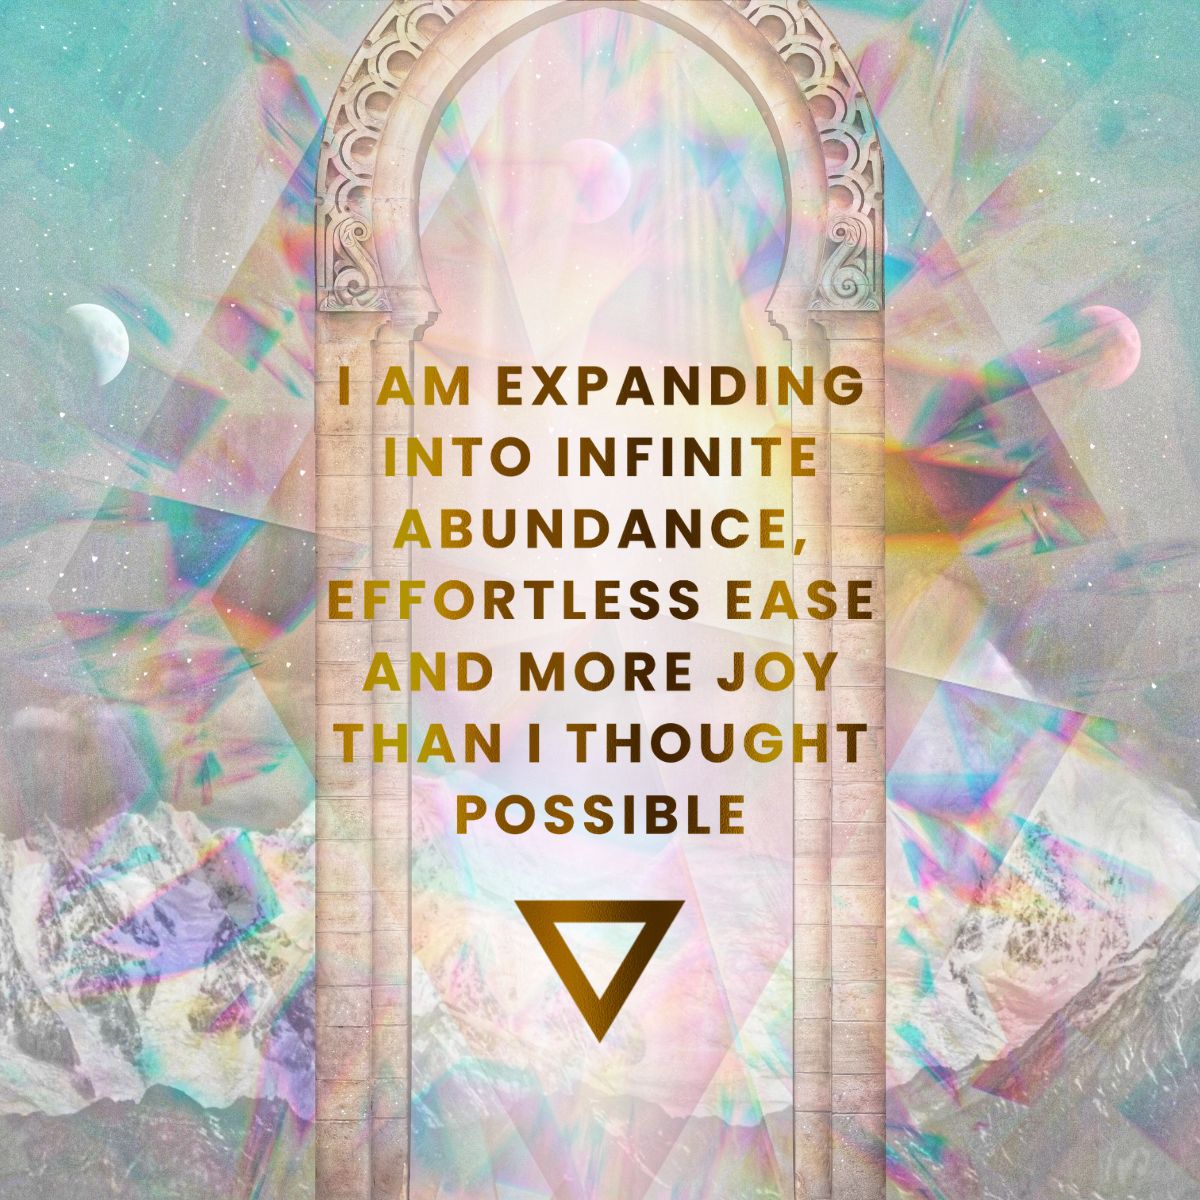 I am Expanding into Infinite Abundance, Effortless Ease and More Joy than I thought Possible